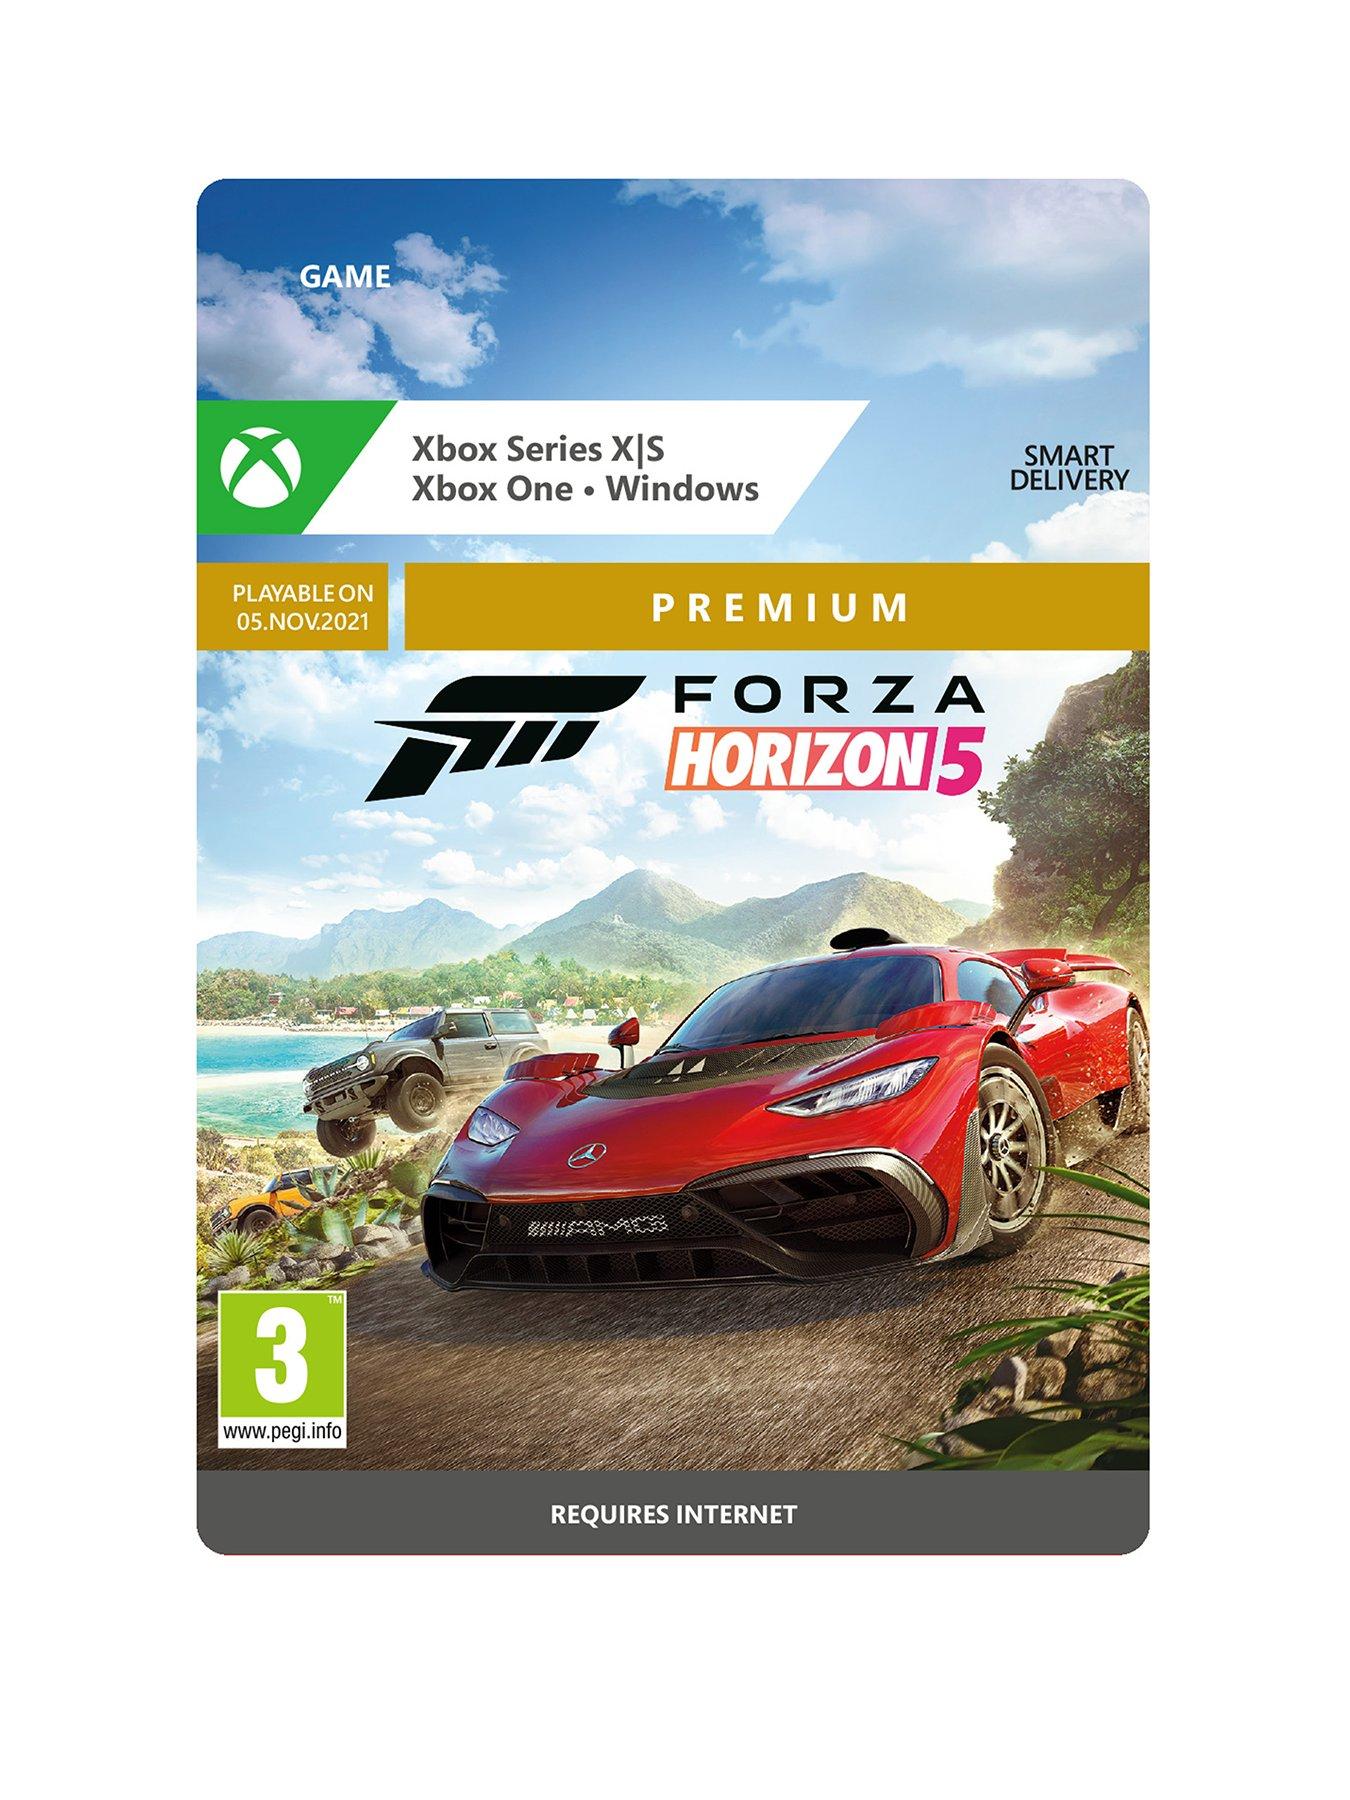 Forza Horizon 3 is $35.99 on PC, but only if you have Xbox Live Gold